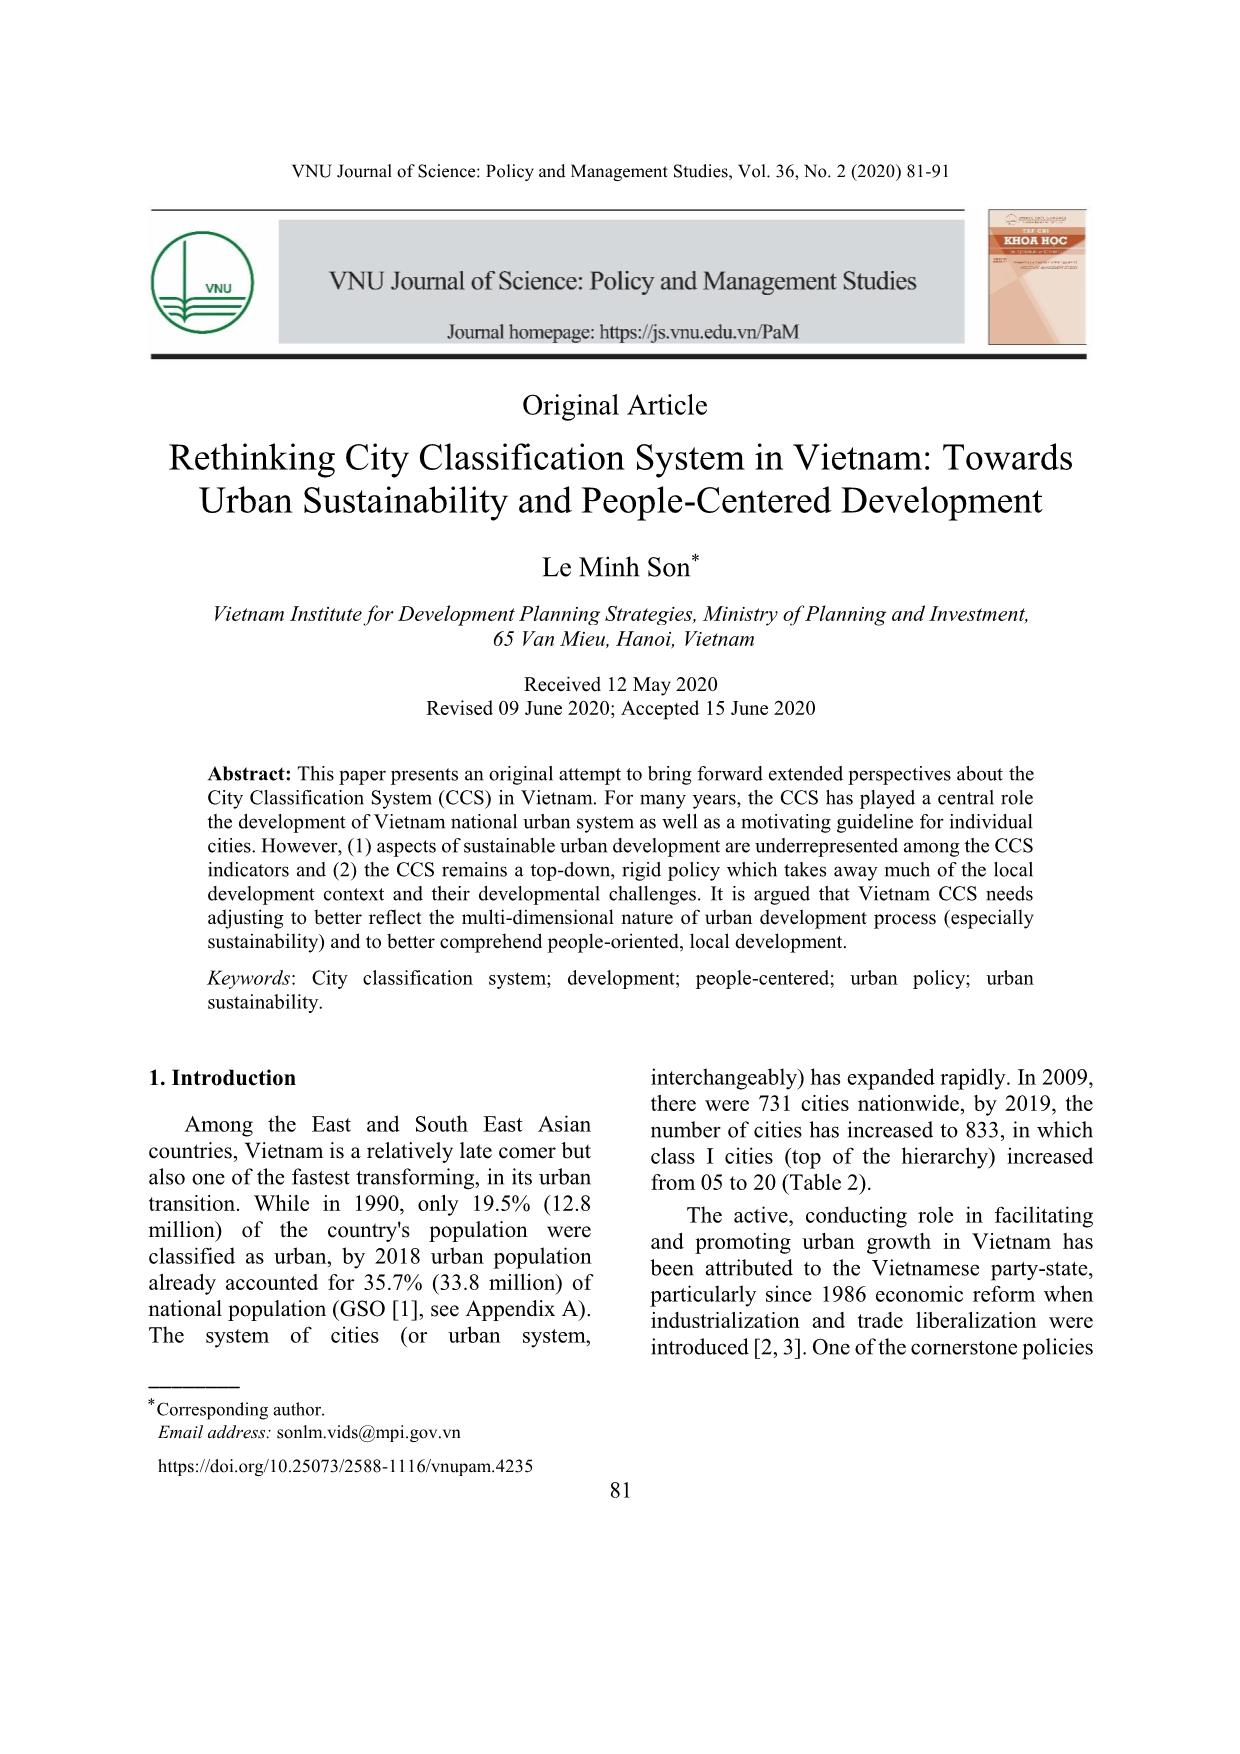 Rethinking City Classification System in Vietnam: Towards Urban Sustainability and People-Centered Development trang 1